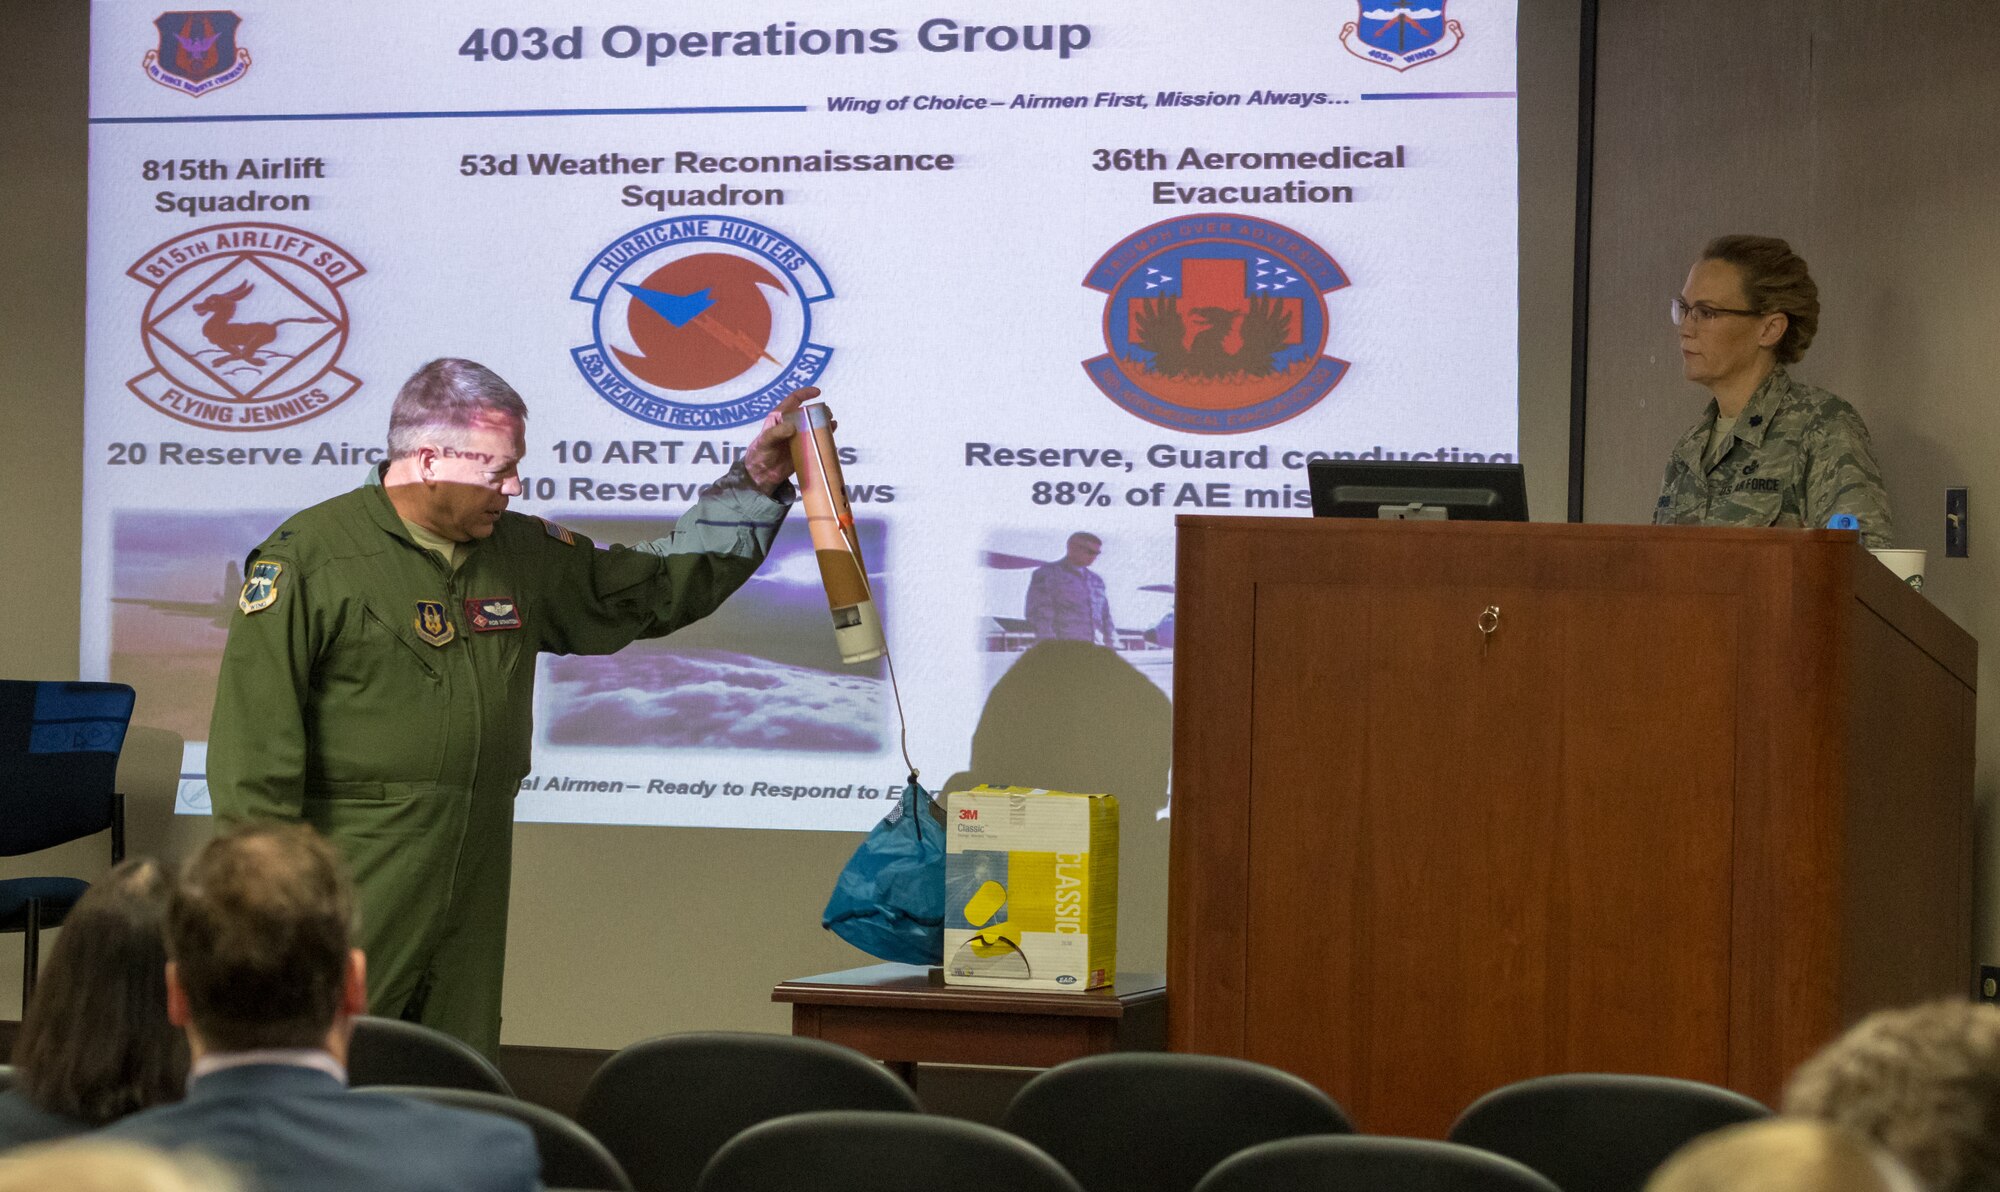 U.S. Air Force Col. Robert Stanton, 403rd Wing vice commander, holds a dropsonde during a mission brief for Keesler honorary commanders during the 403rd Wing Honorary Commanders Tour at the 53rd Weather Reconnaissance Squadron at Keesler Air Force Base, Mississippi, March 08, 2019. The tour was intended to familiarize honorary commanders with the 403rd Wing and the Air Force Reserve mission and capabilities. The event also included an incentive flight on a WC-130J Hercules. (U.S. Air Force Photo by Andre' Askew)